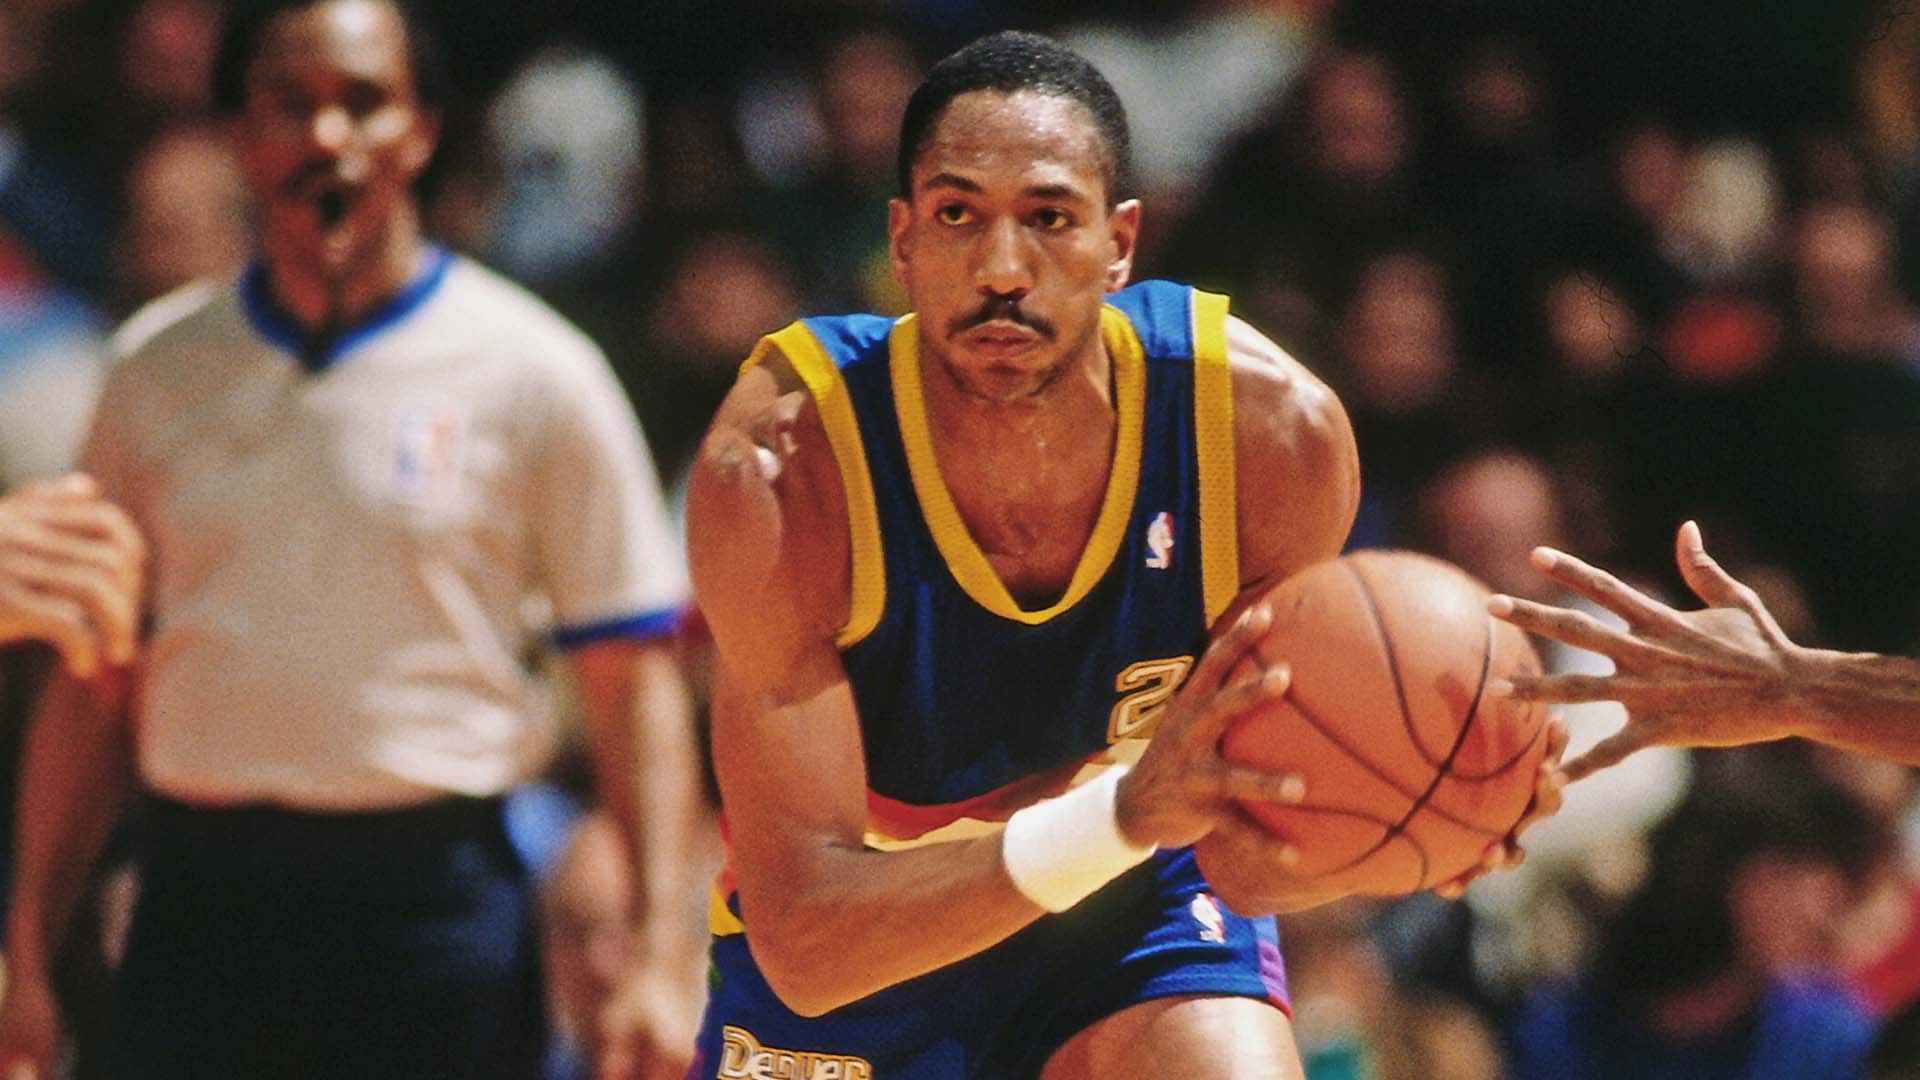 ATLANTA - 1990: Alex English #2 of the Denver Nuggets drives against the Atlanta Hawks during a game played circa 1990 at the Omni  in Atlanta, Georgia. NOTE TO USER: User expressly acknowledges and agrees that, by downloading and or using this photograph, User is consenting to the terms and conditions of the Getty Images License Agreement. Mandatory Copyright Notice: Copyright 1990 NBAE (Photo by Scott Cunningham/NBAE via Getty Images)